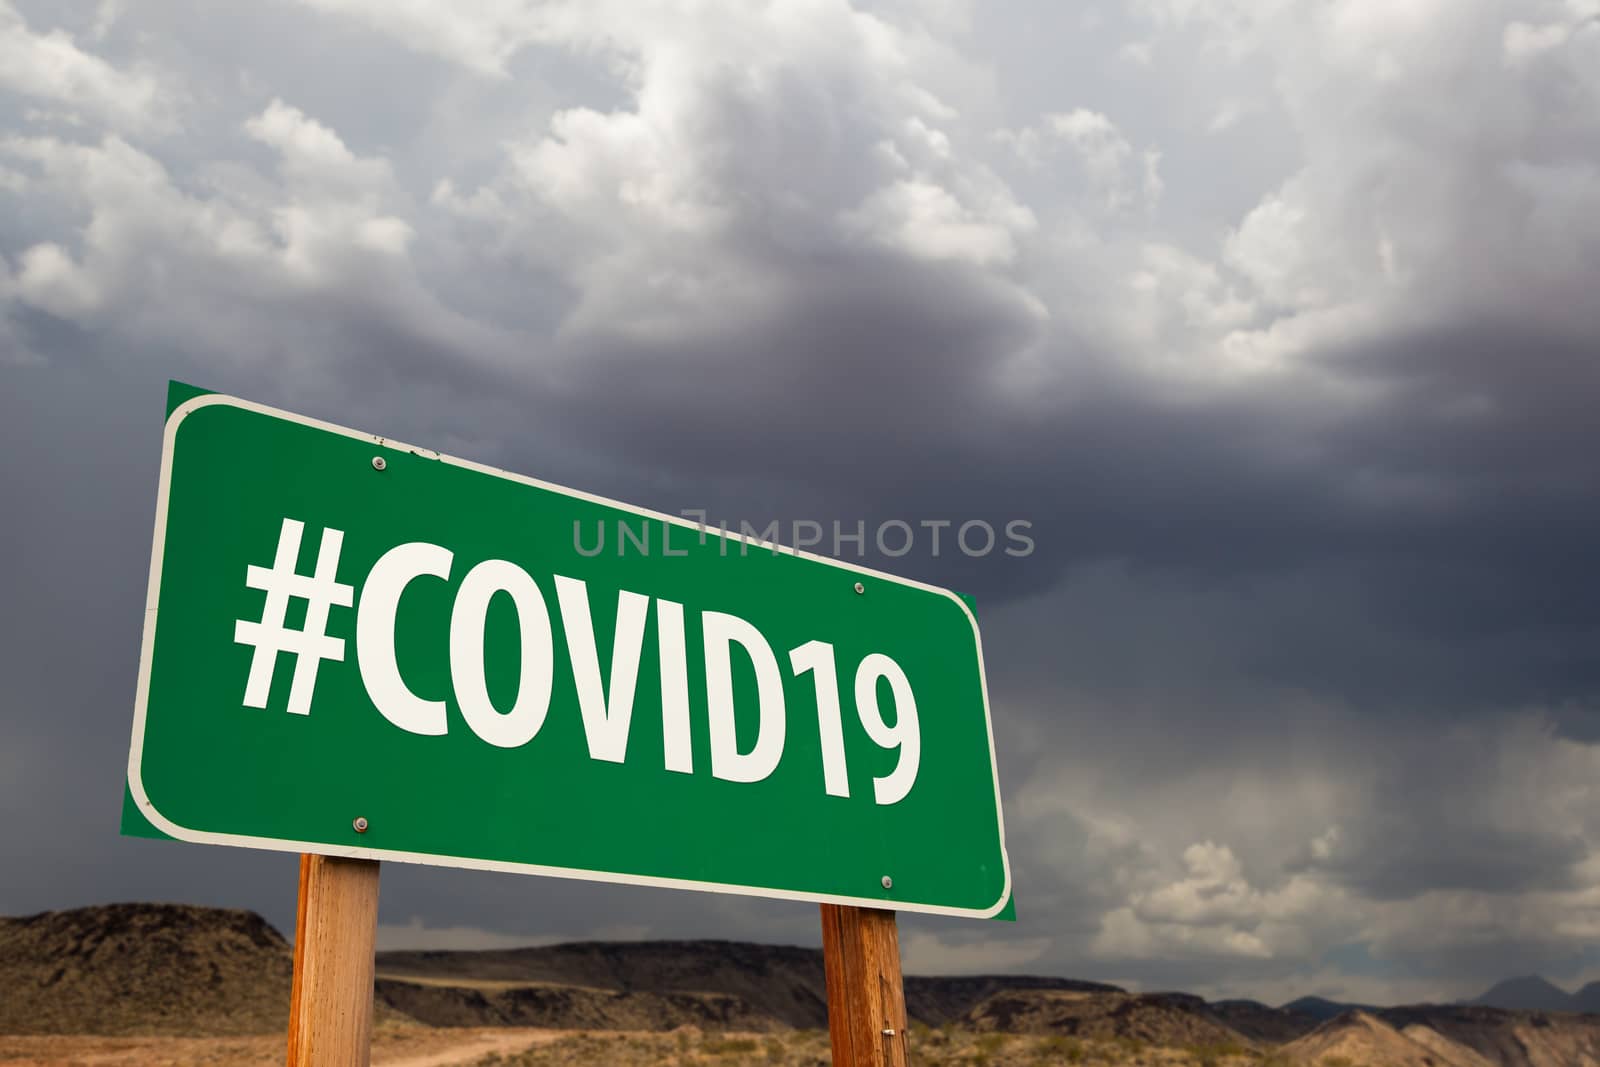 #COVID19 Green Road Sign Against An Ominous Cloudy Sky by Feverpitched